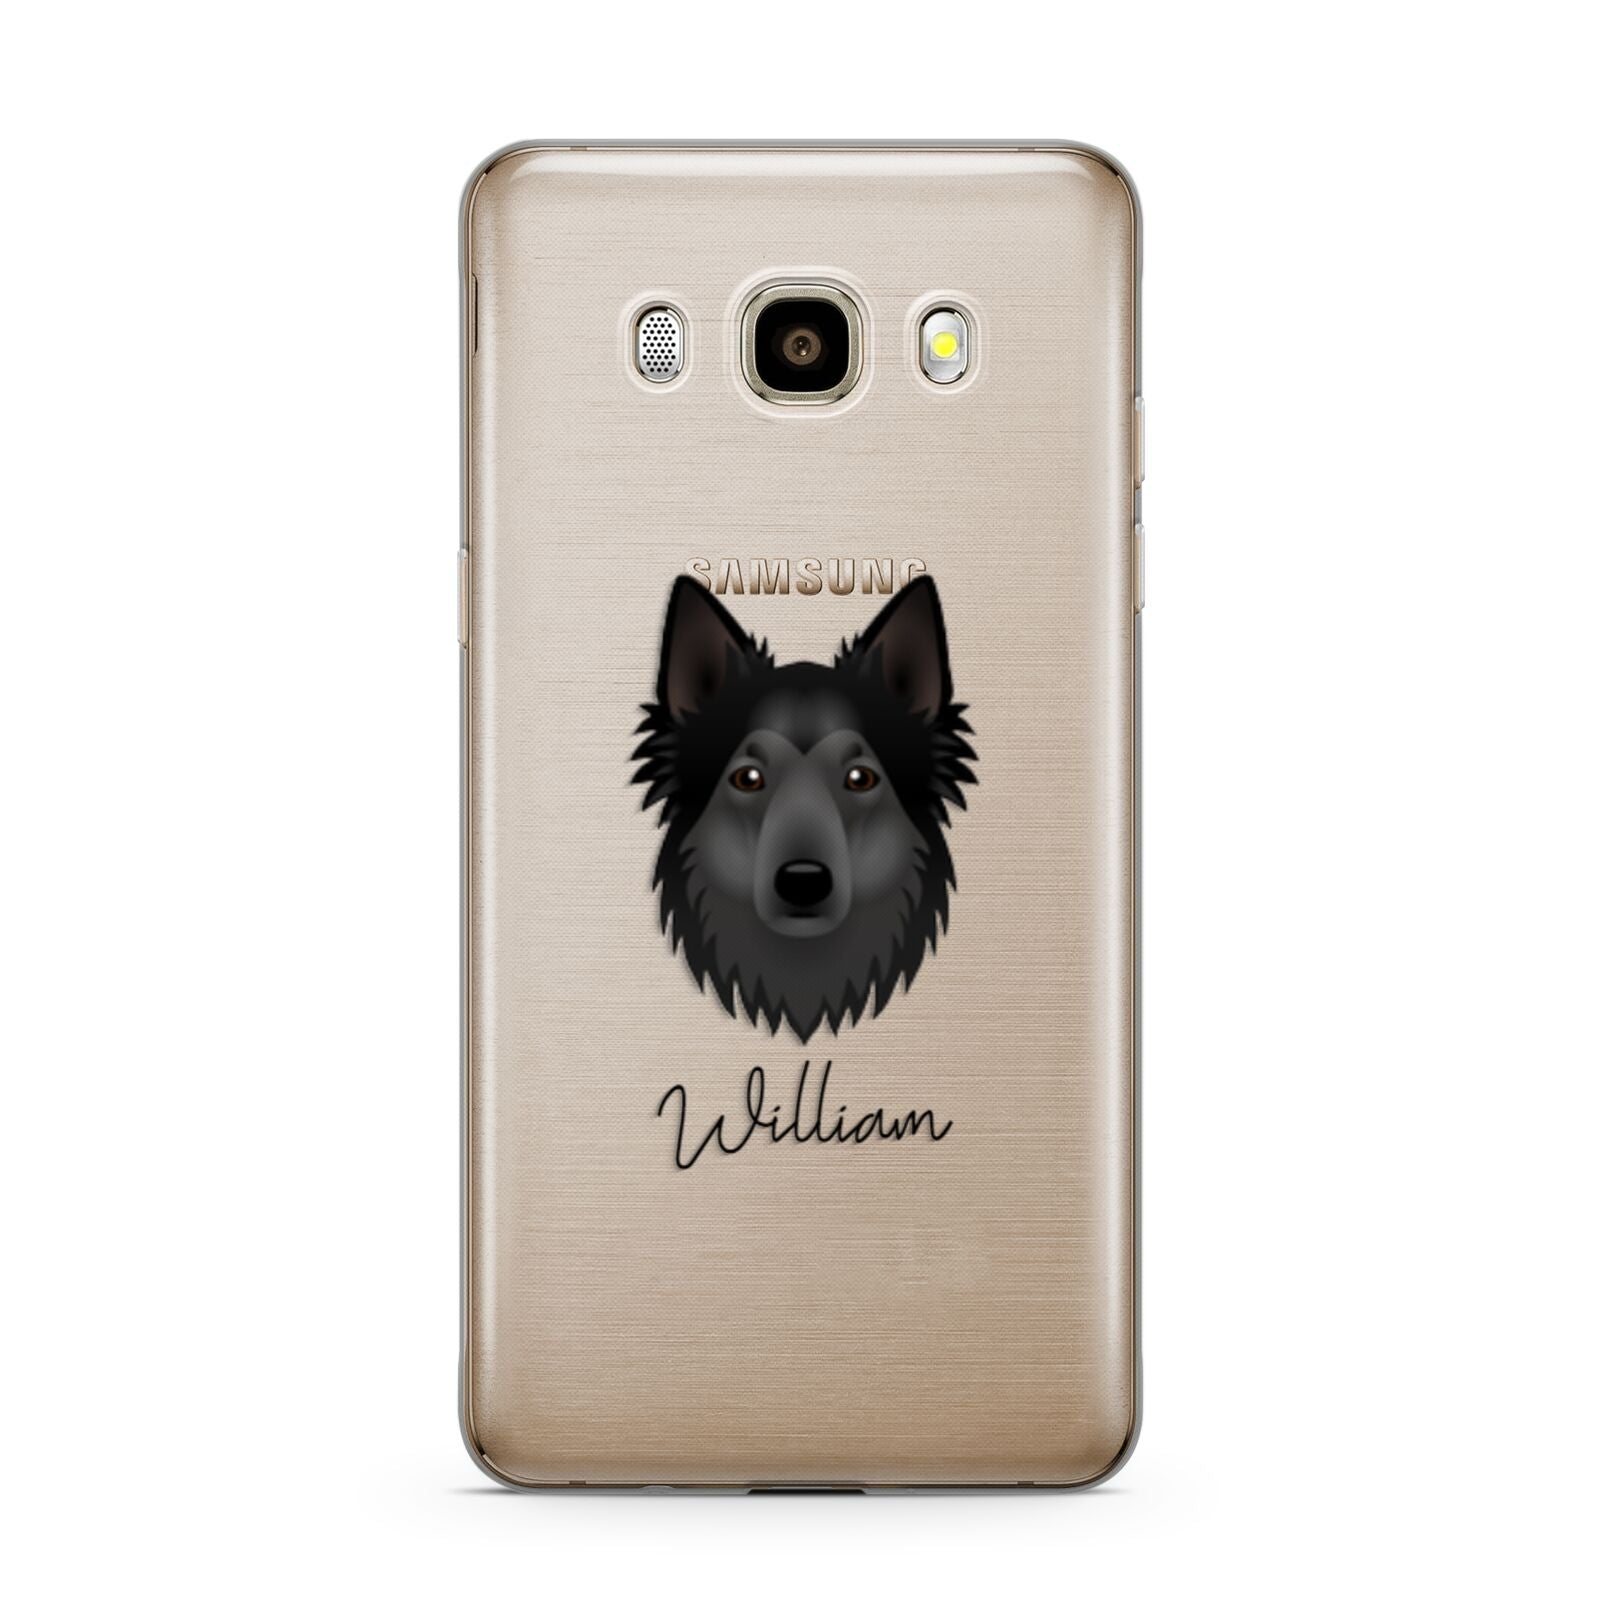 Shollie Personalised Samsung Galaxy J7 2016 Case on gold phone